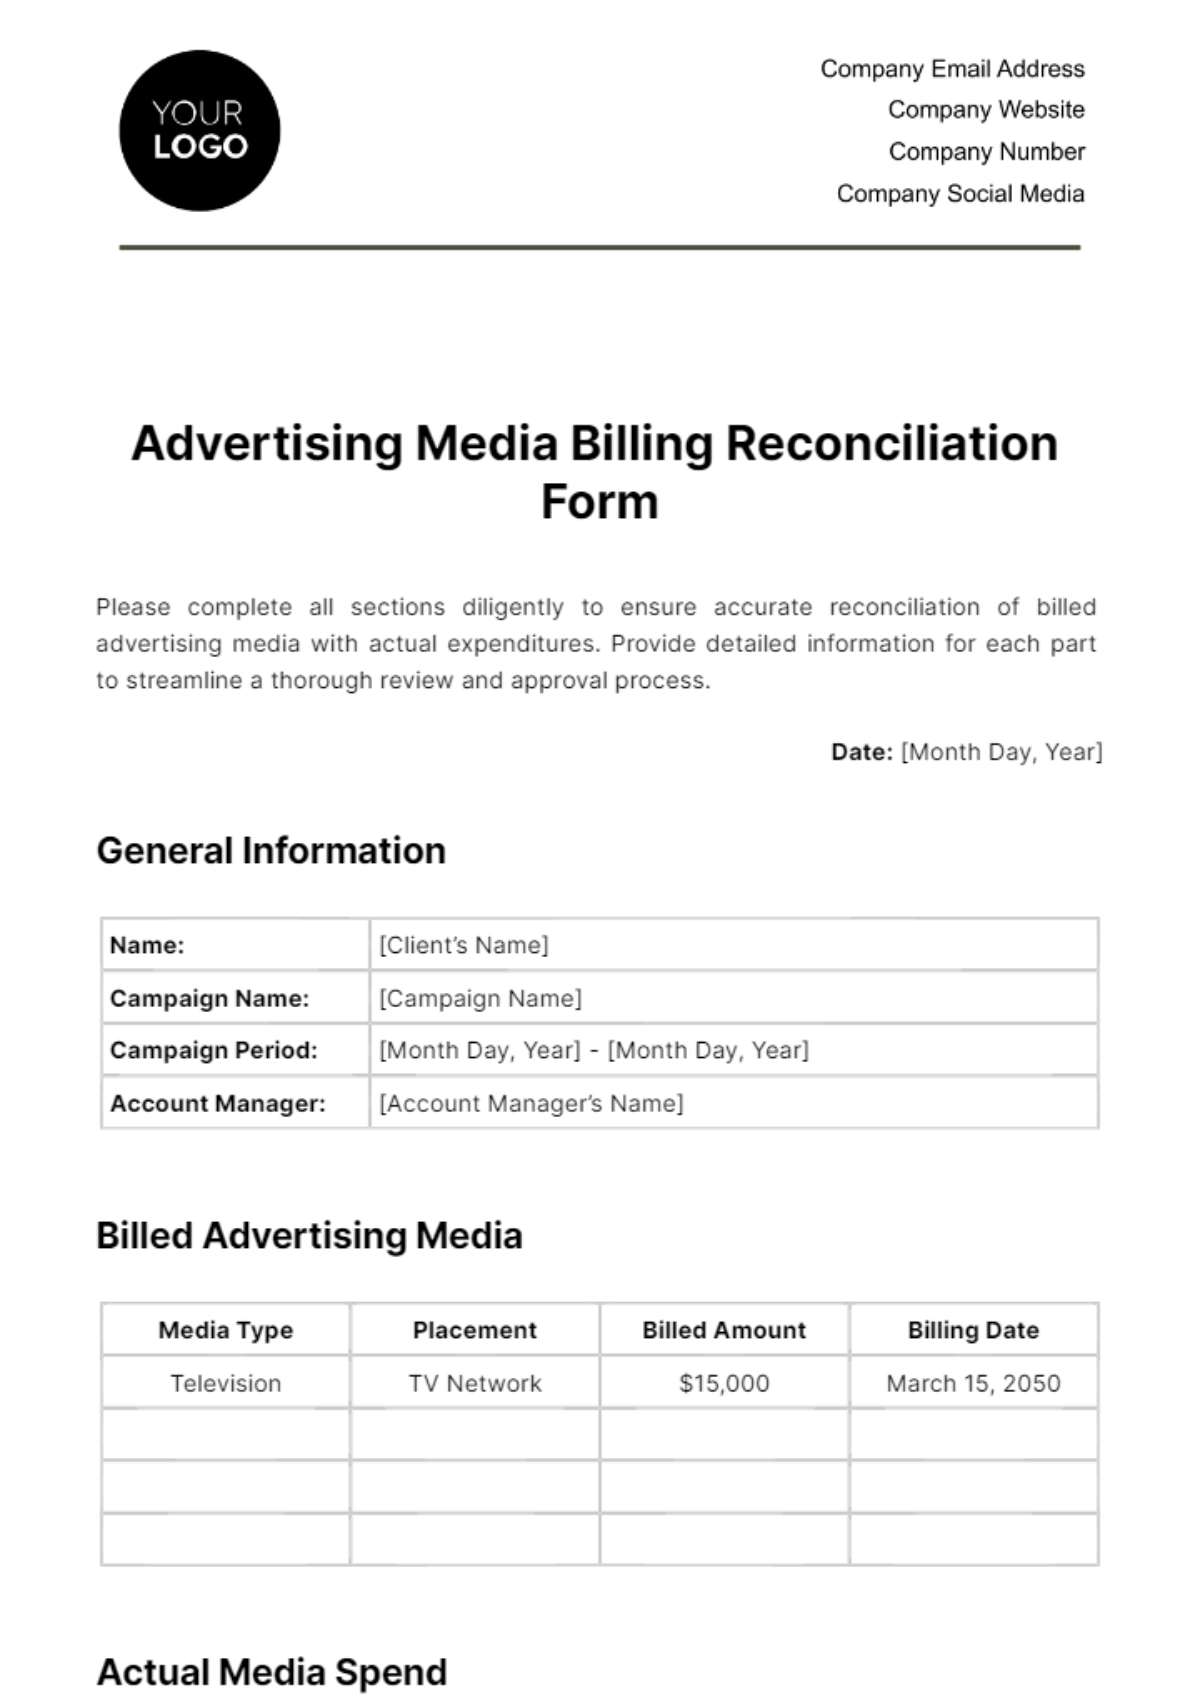 Free Advertising Media Billing Reconciliation Form Template